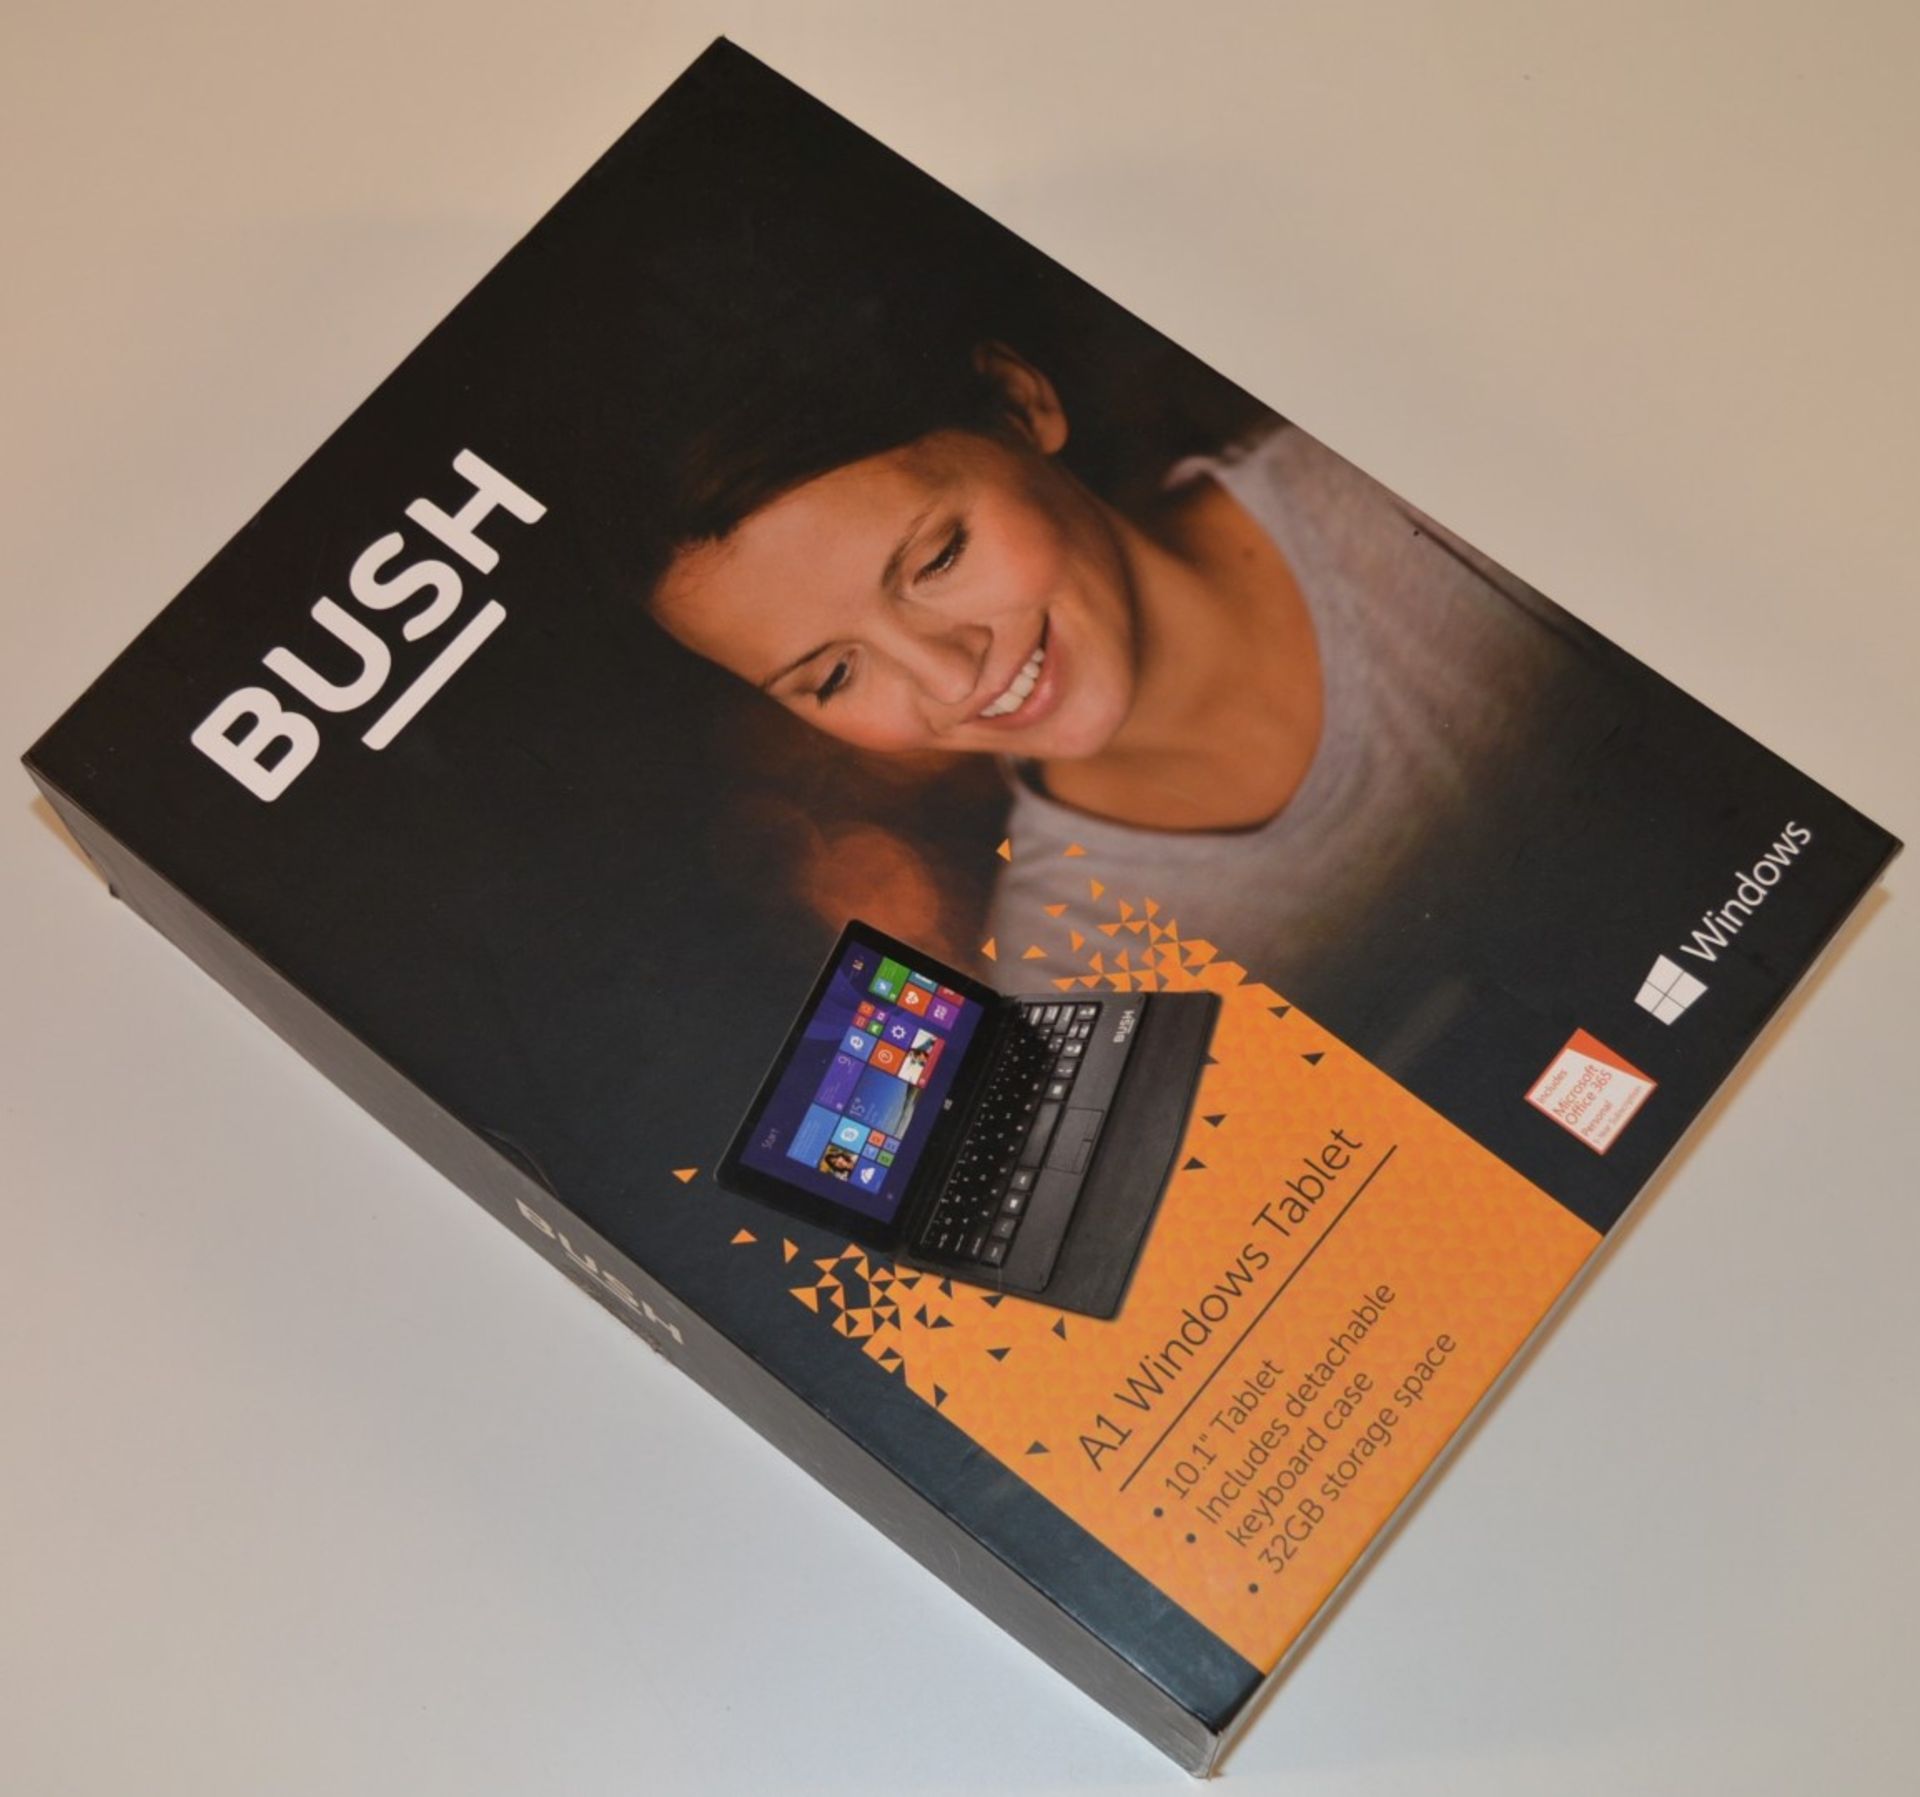 1 x Bush A1 10.1 Inch Windows Tablet - Features Include Intel Atom 1.8ghz Quad Core Processor, 1gb - Image 2 of 11